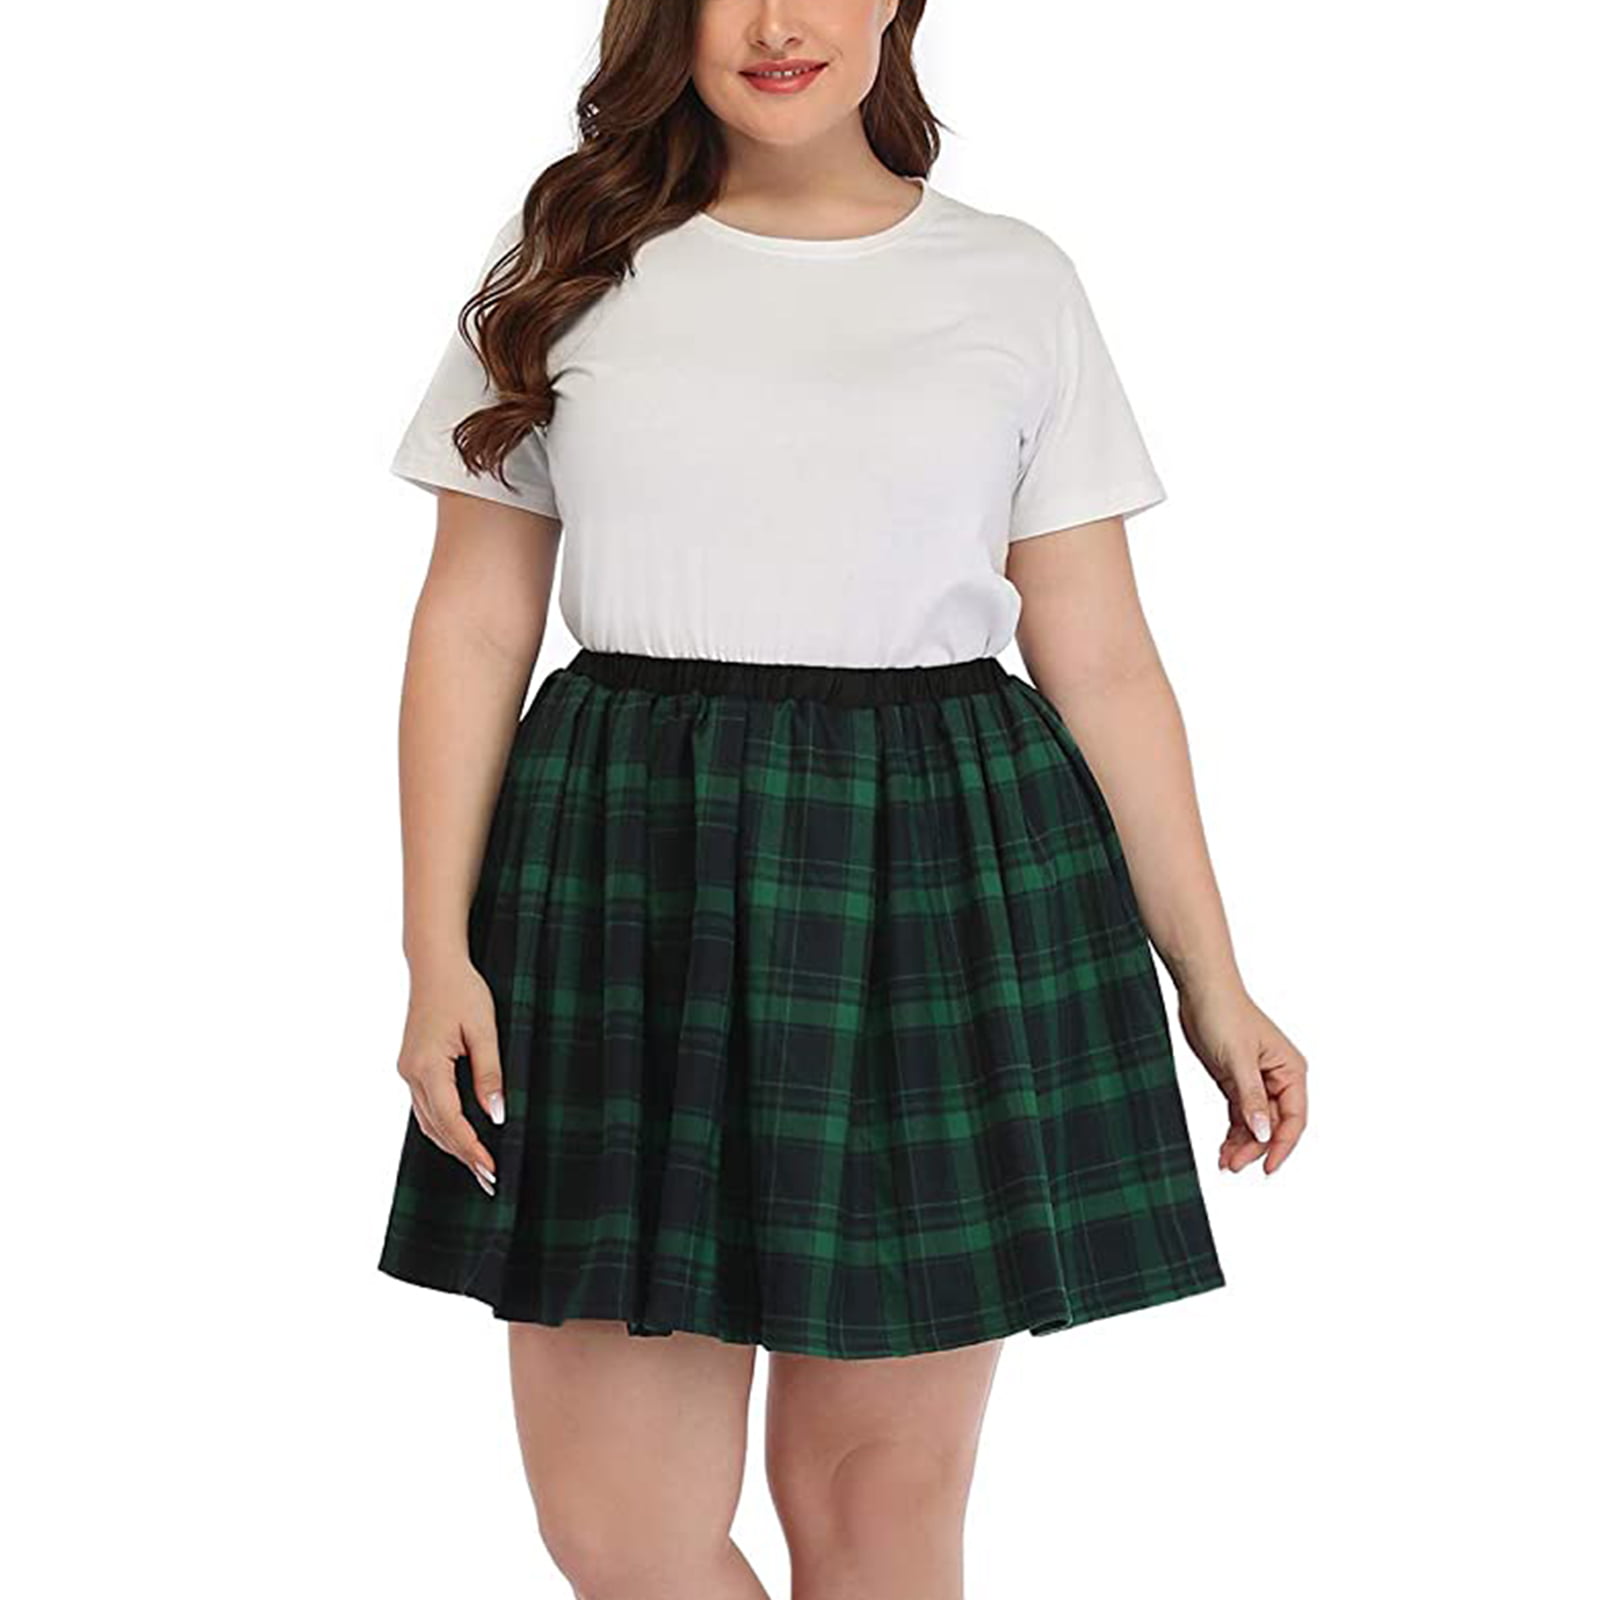 LADIES NEW TARTAN PRINT SKIRT WITH DETACHABLE BRACE'S SIZES 8-20 IN RED OR BLACK 